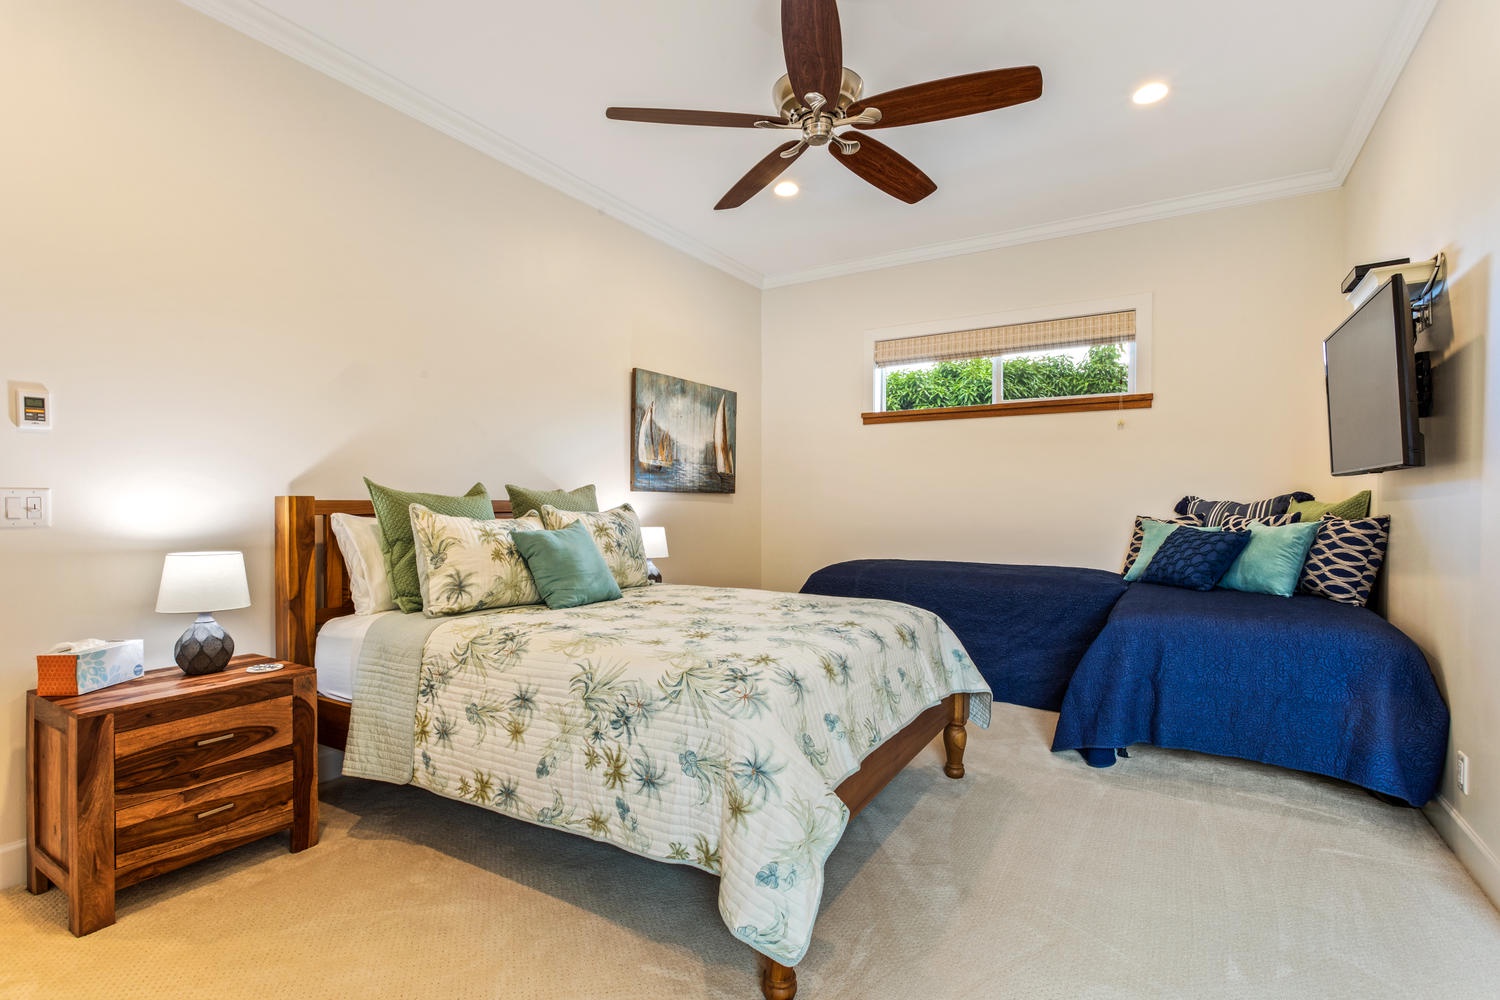 Kailua Kona Vacation Rentals, Ohana le'ale'a - The third bedroom is a perfect spot for families traveling with little ones